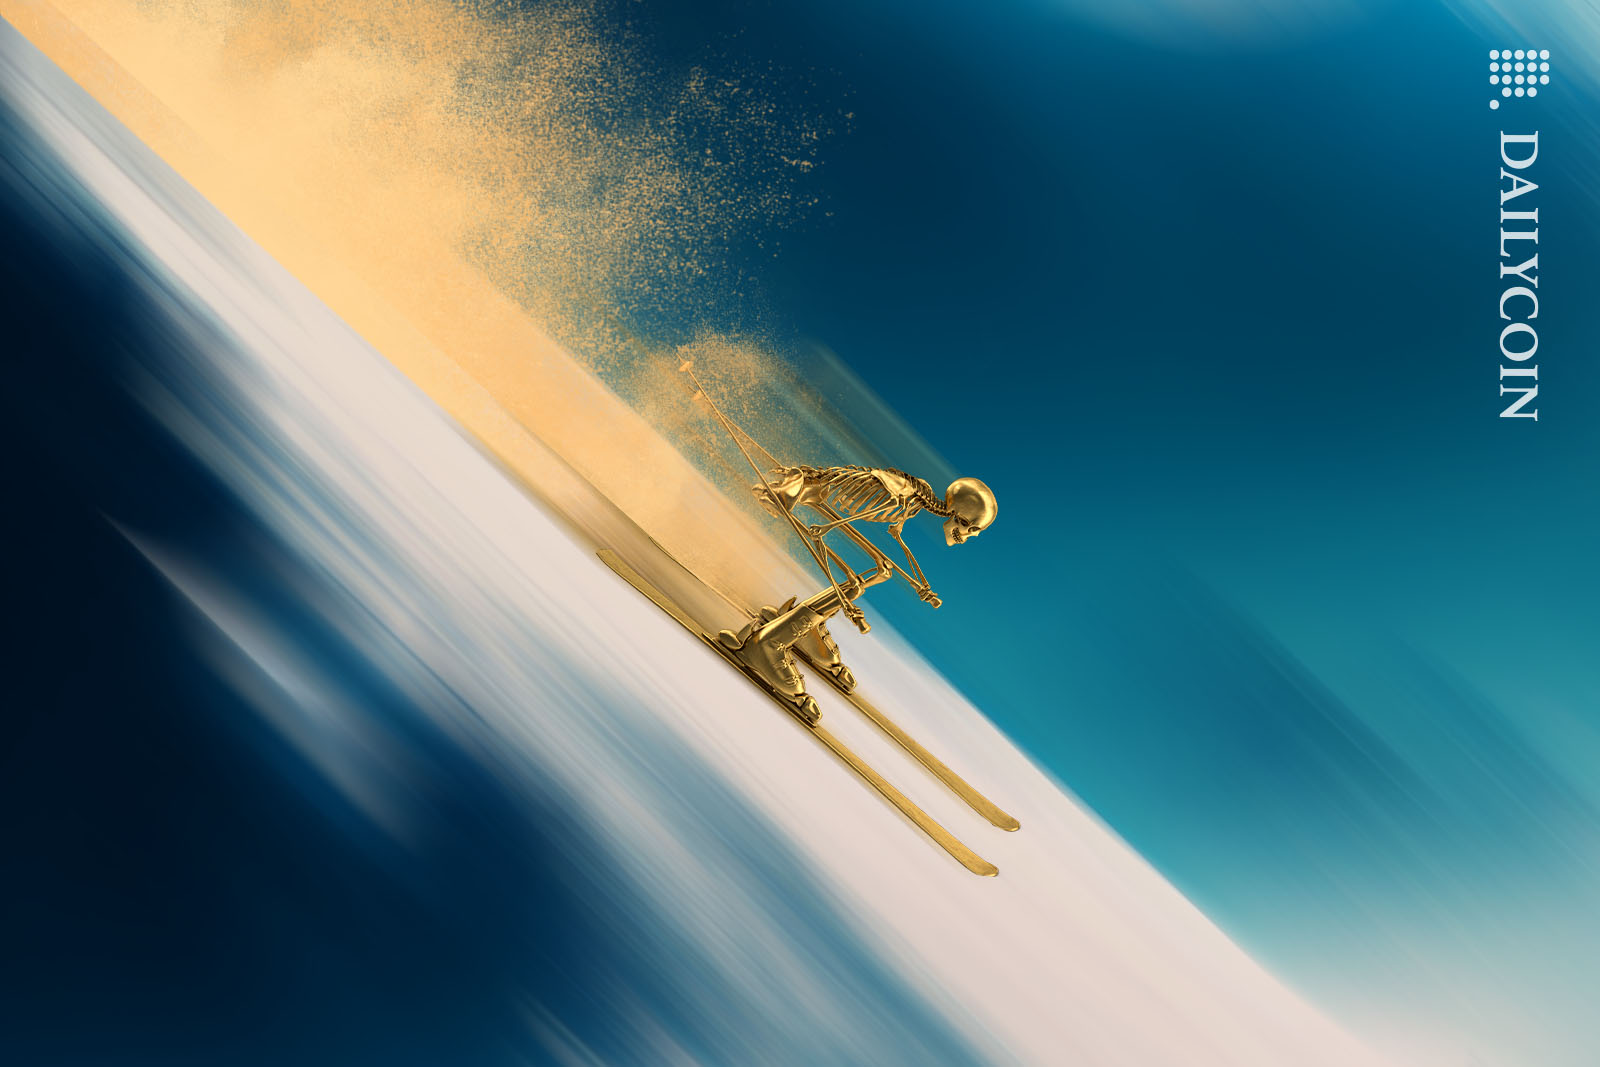 A golden skeleton skiing down an avalance with high speed.